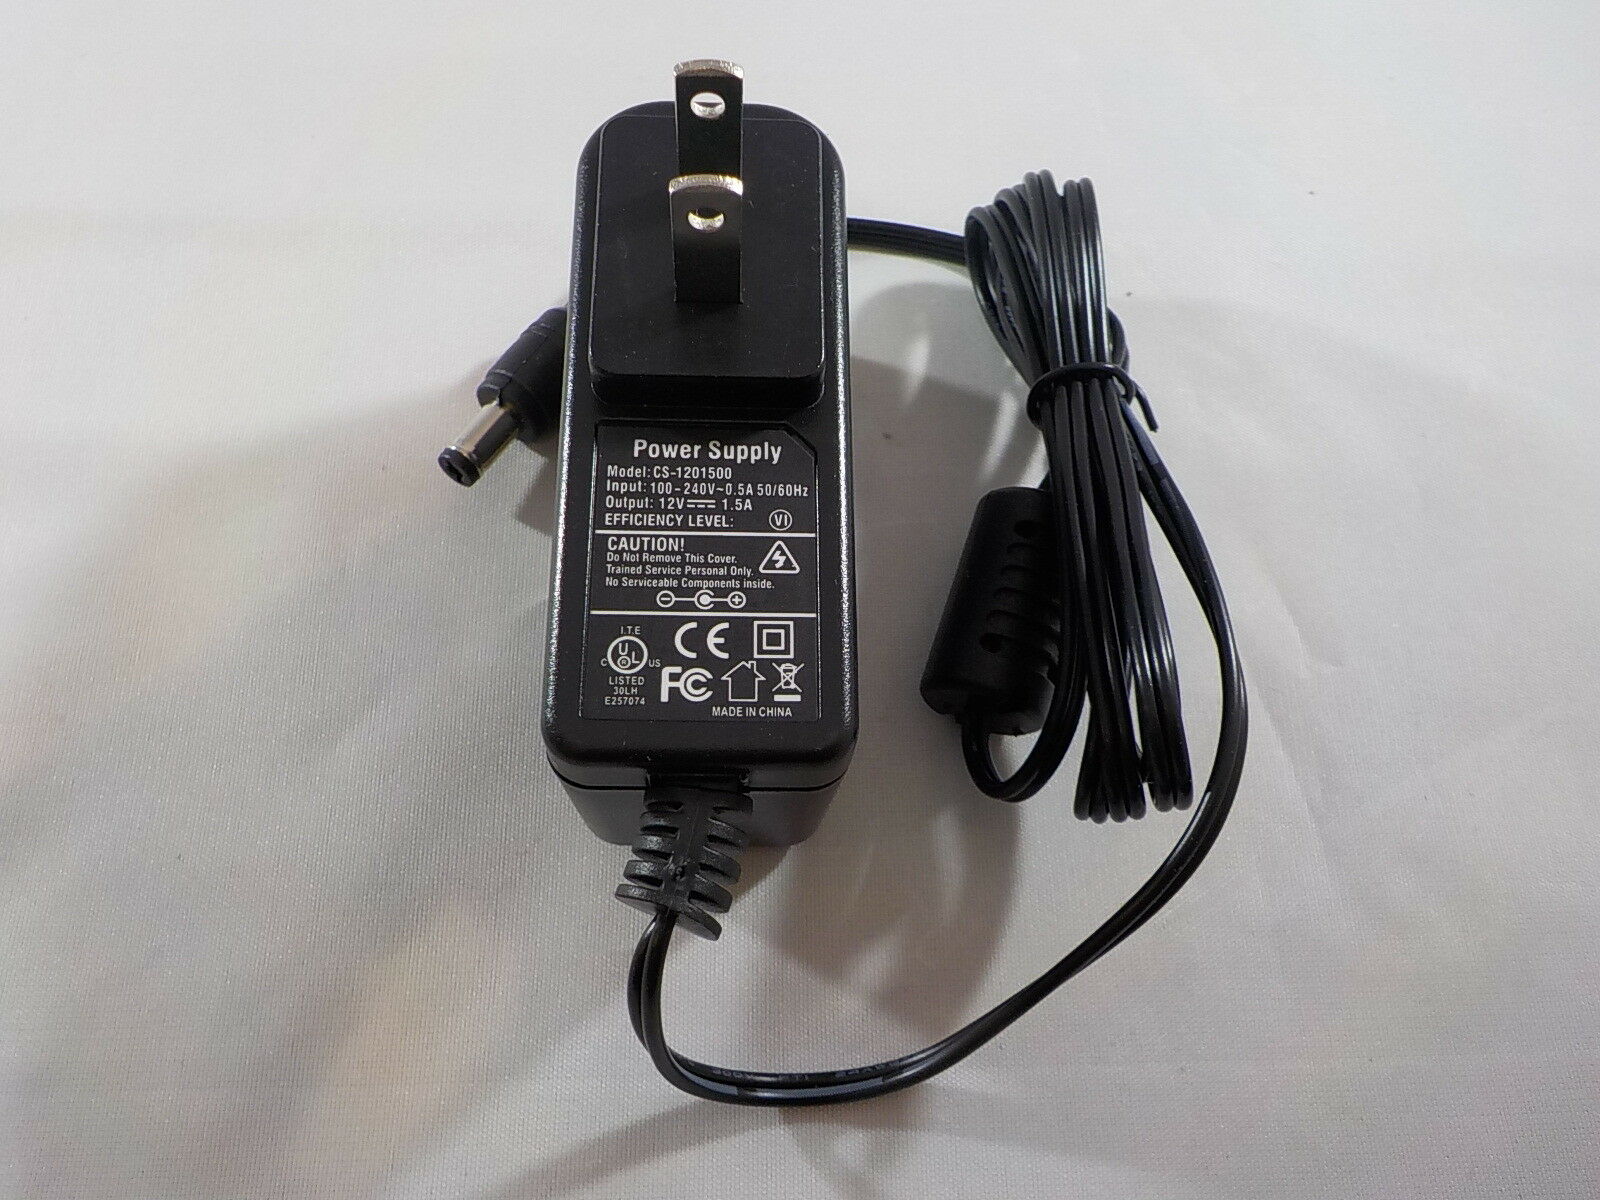 NEW 12V 1.5A AC to DC Power Supply Adapter for Night Owl Security Camera CS-1201500